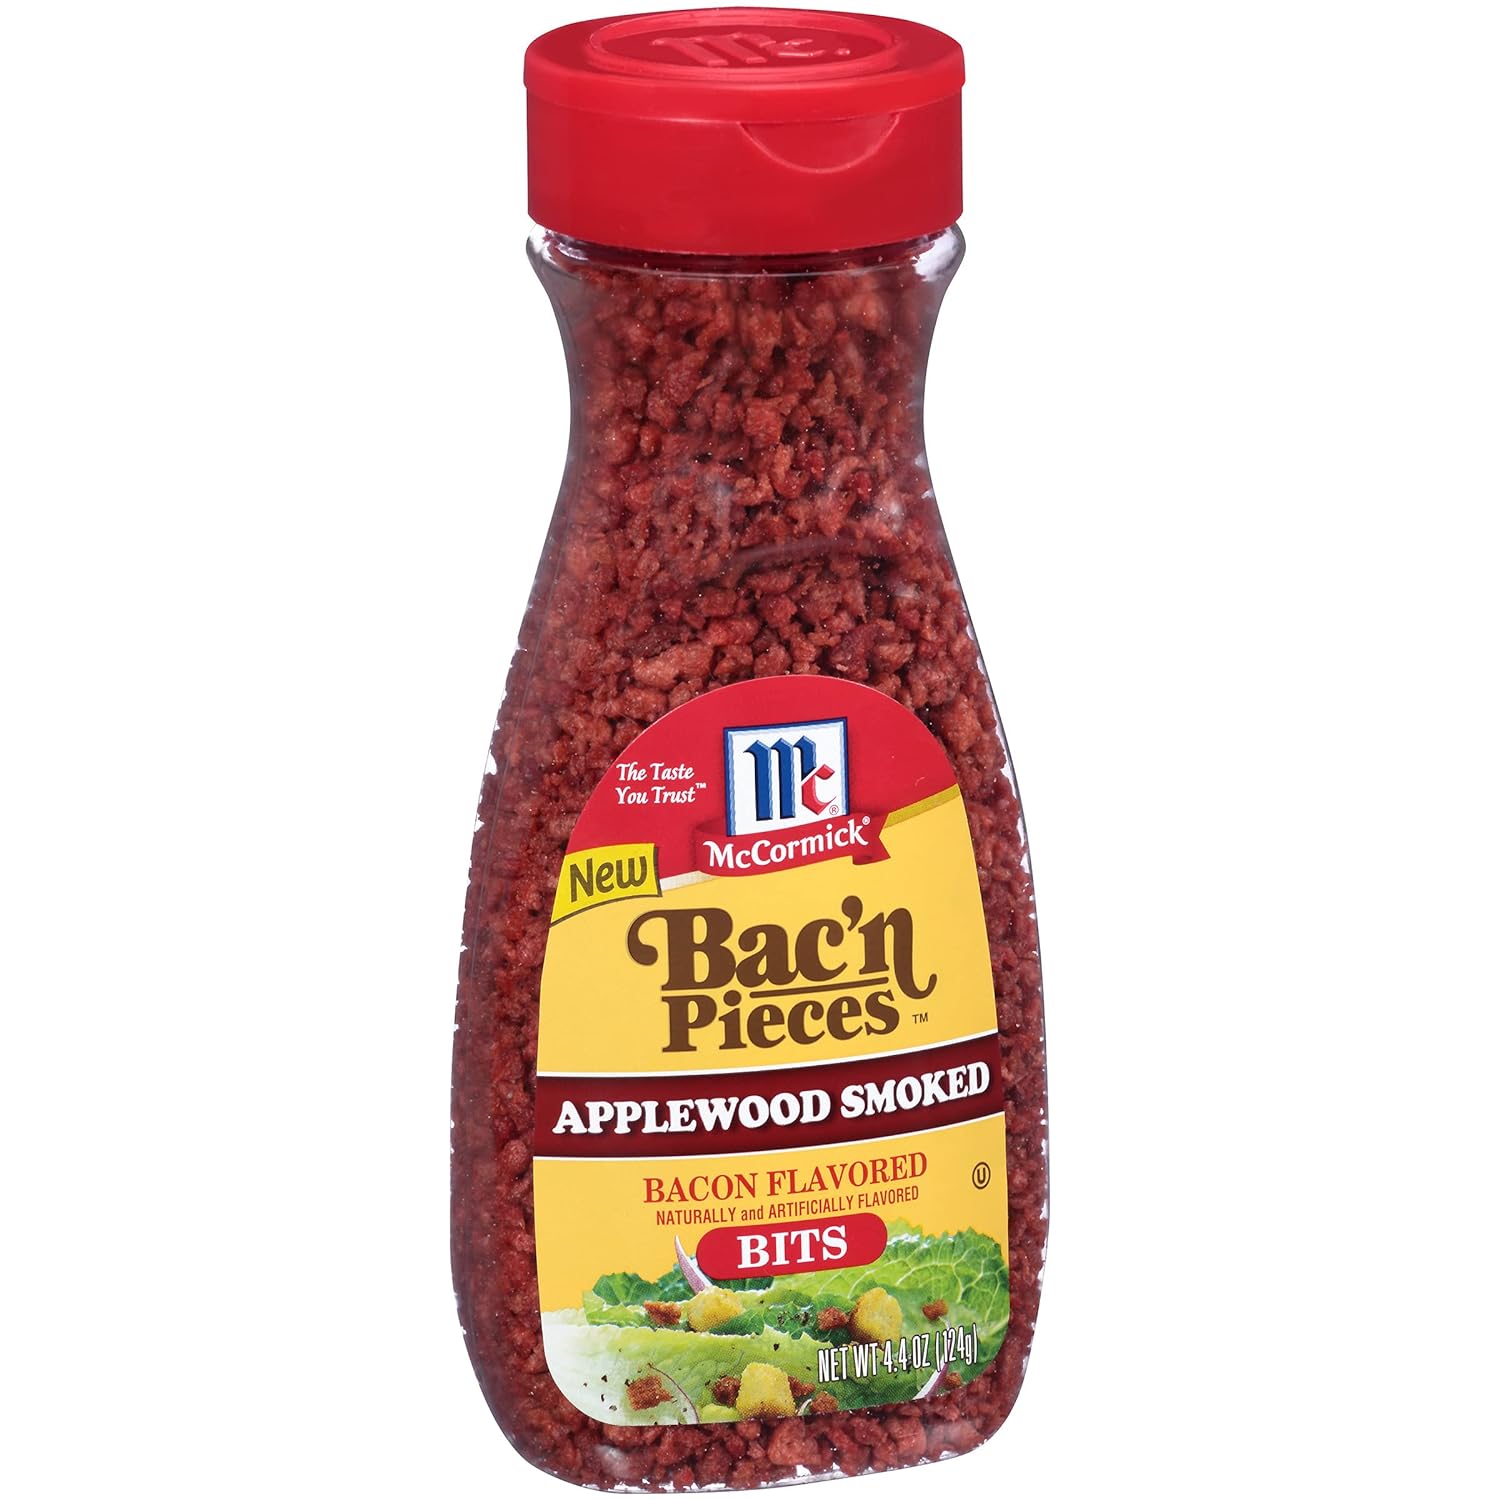 McCormick Bac'n Pieces Applewood Smoked Bacon Flavored Bits, 4.4 oz (Pack of 6)